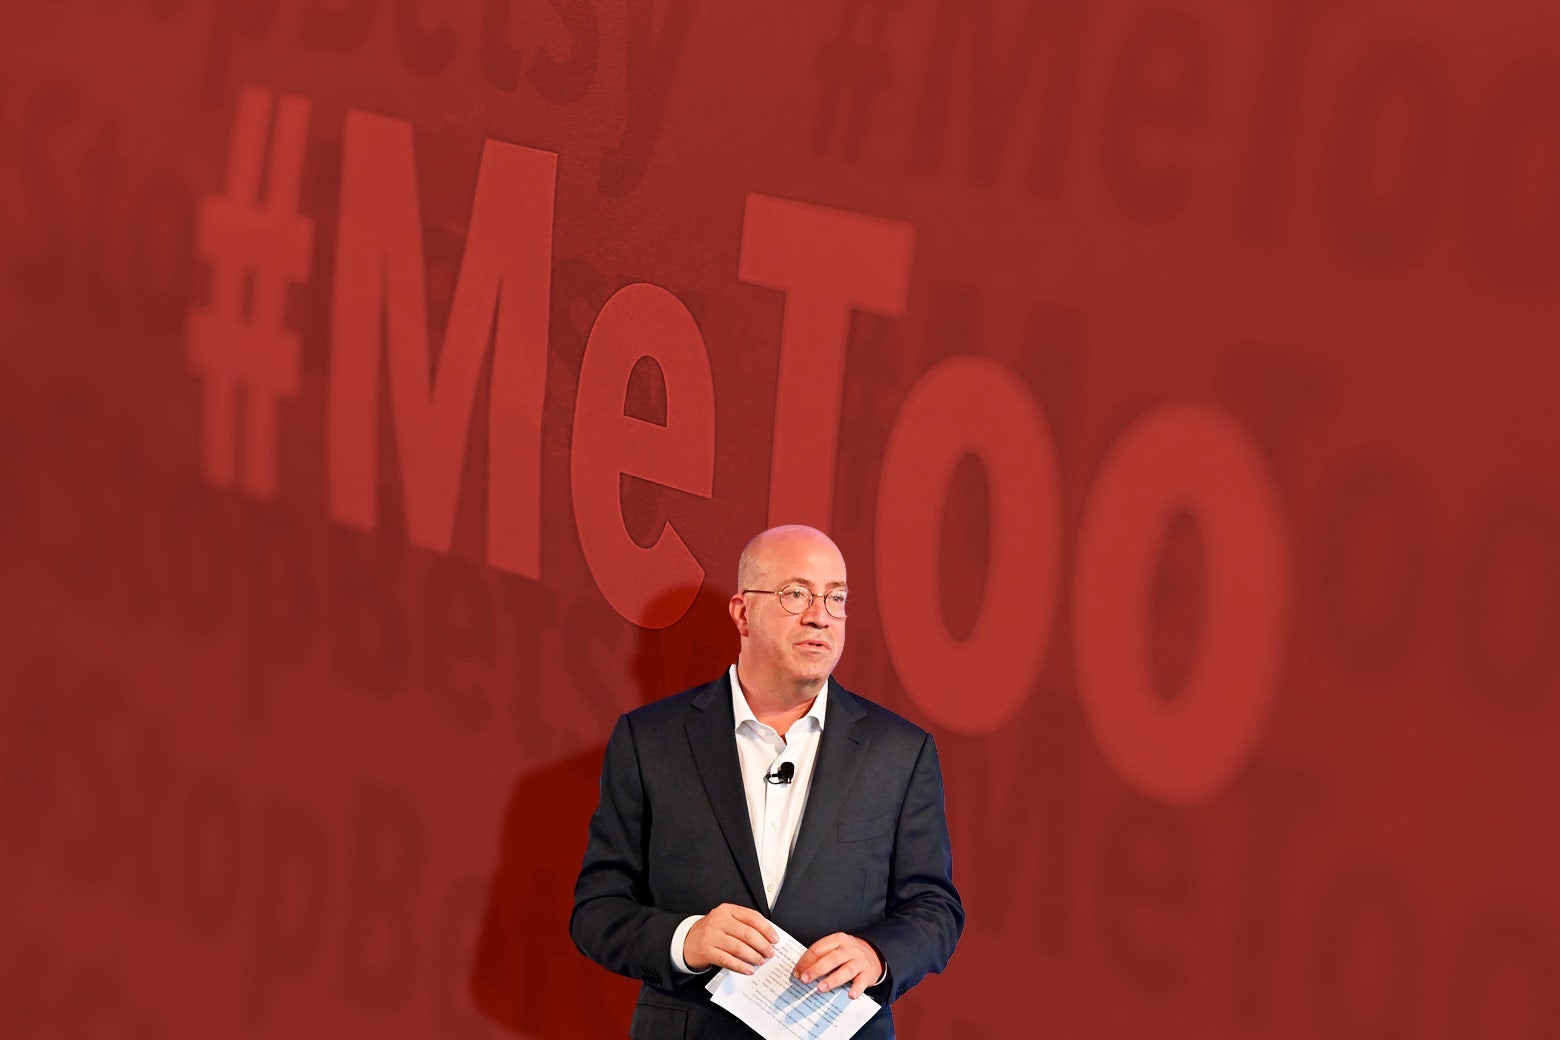 Jeff Zucker with the words #MeToo illustrated behind him.